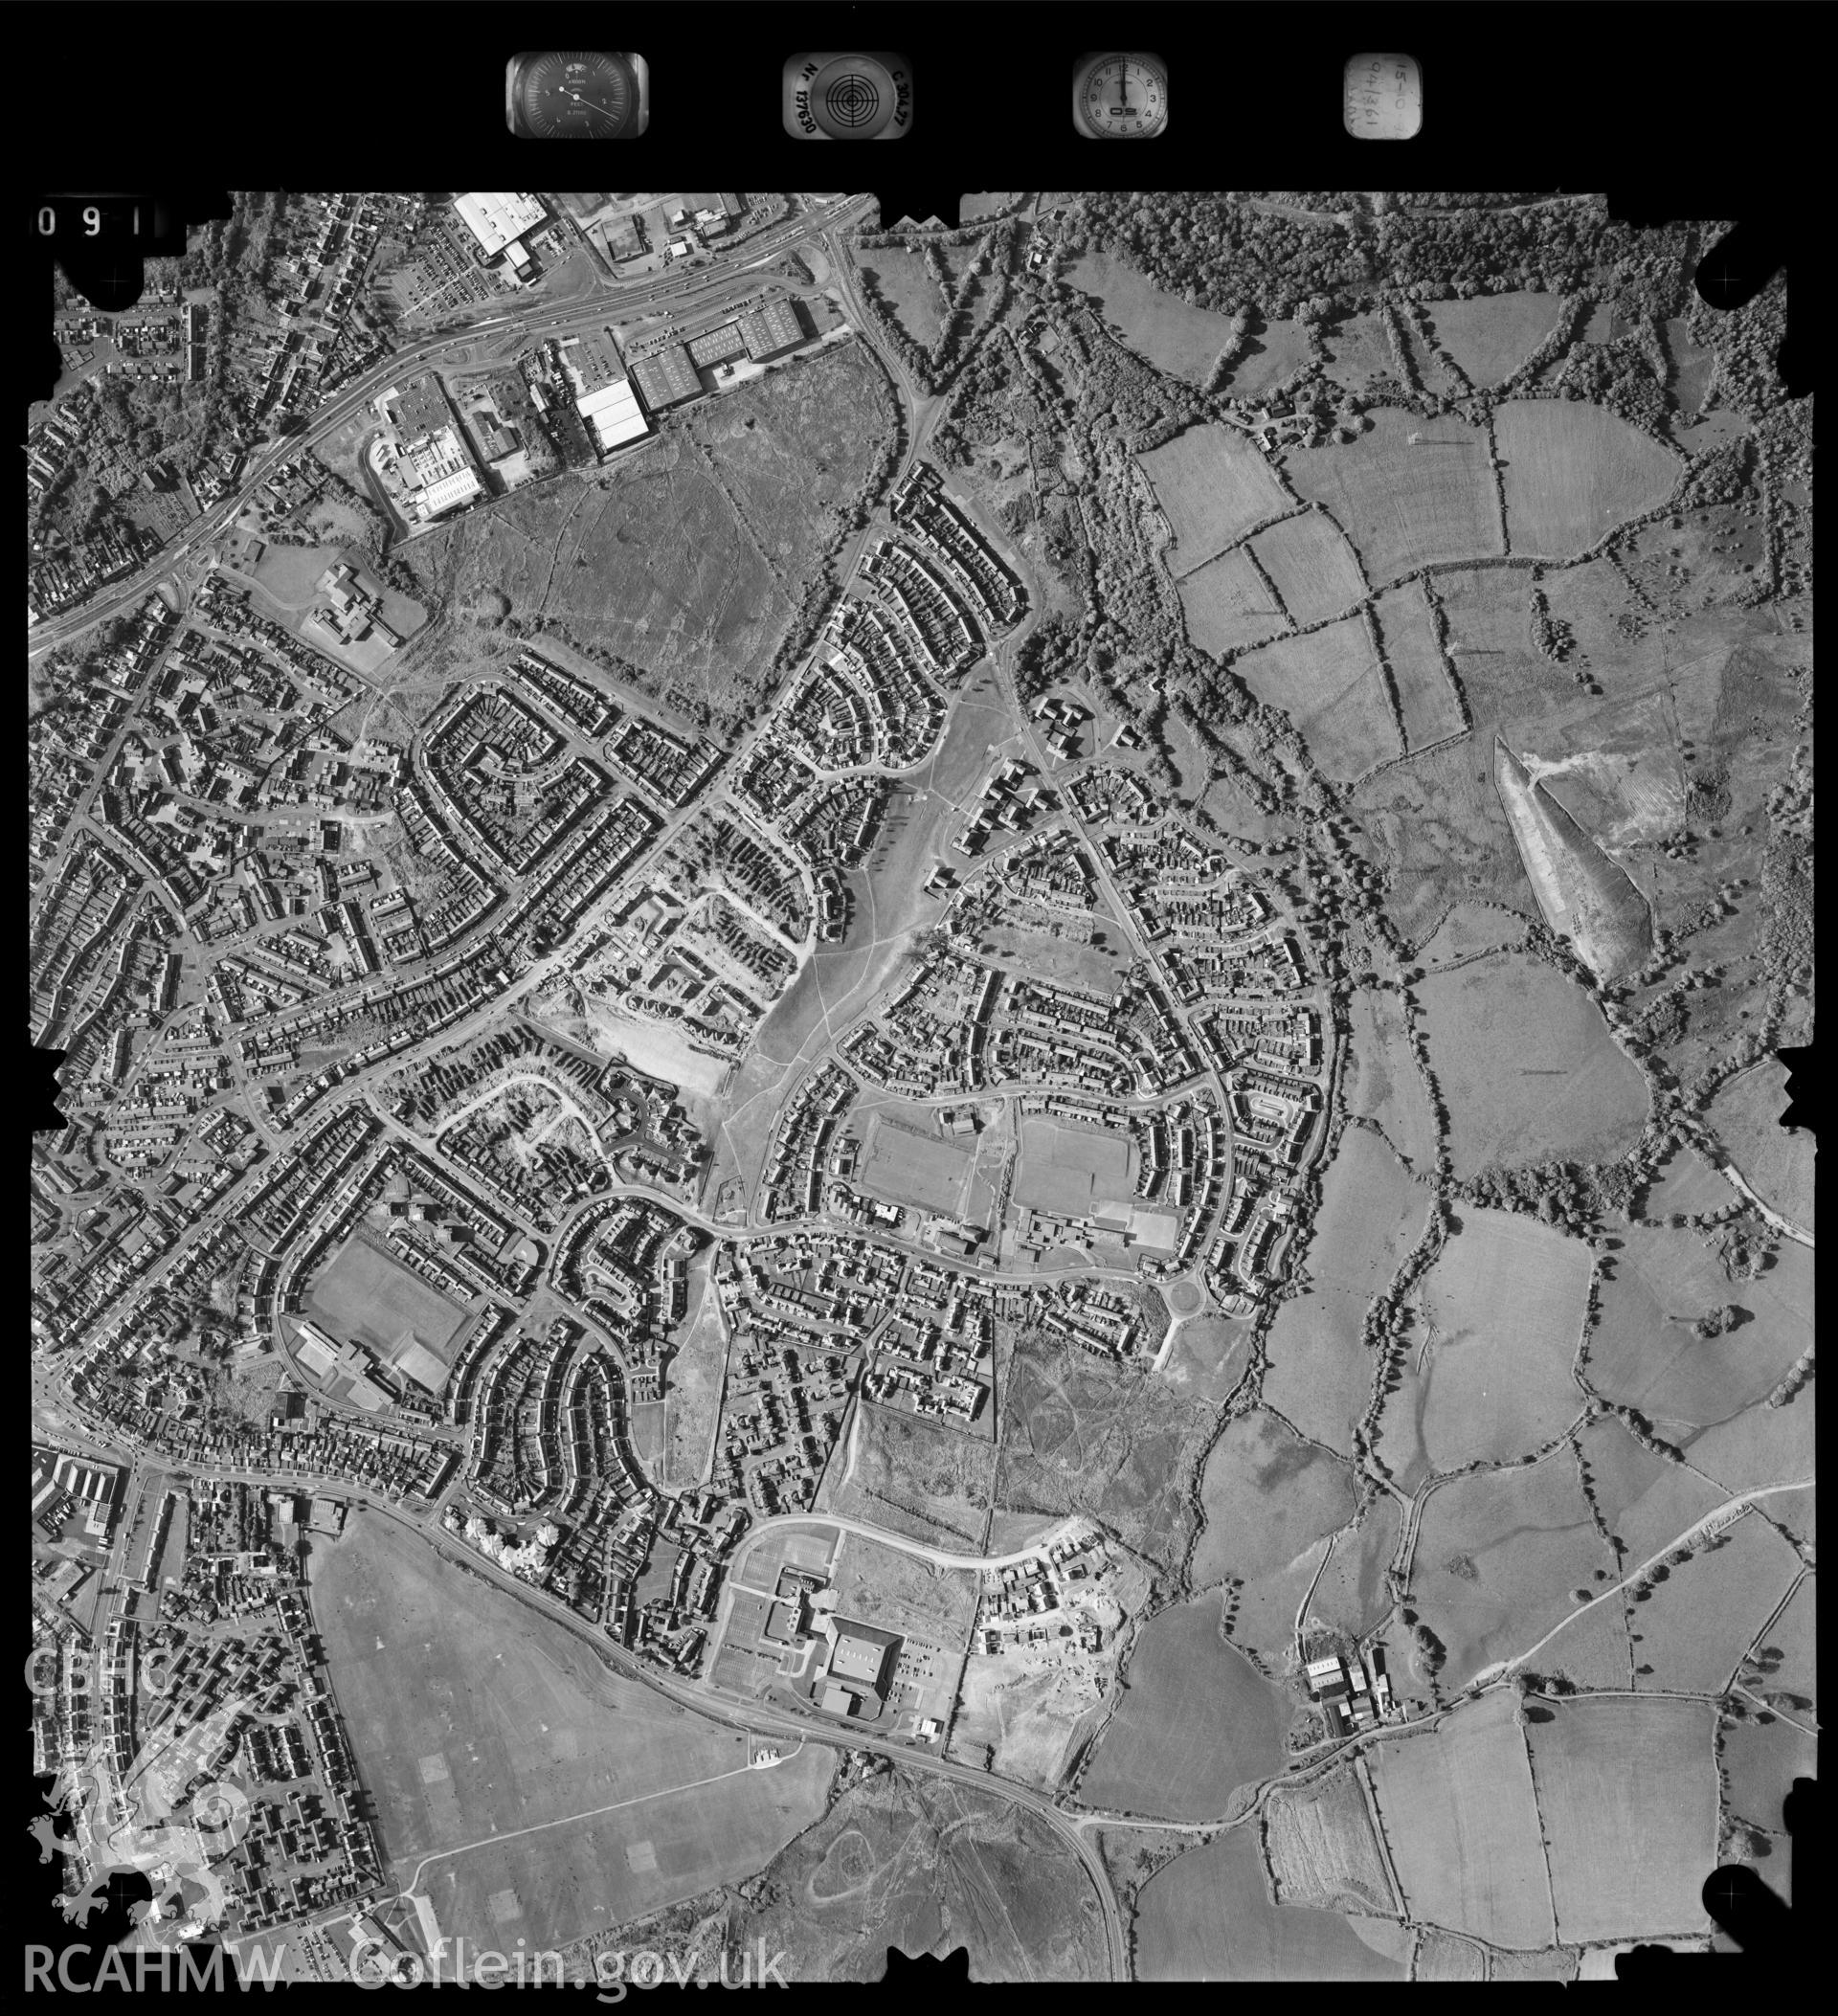 Digitized copy of an aerial photograph showing the Winsh-wen area of Swansea, taken by Ordnance Survey, 1994.